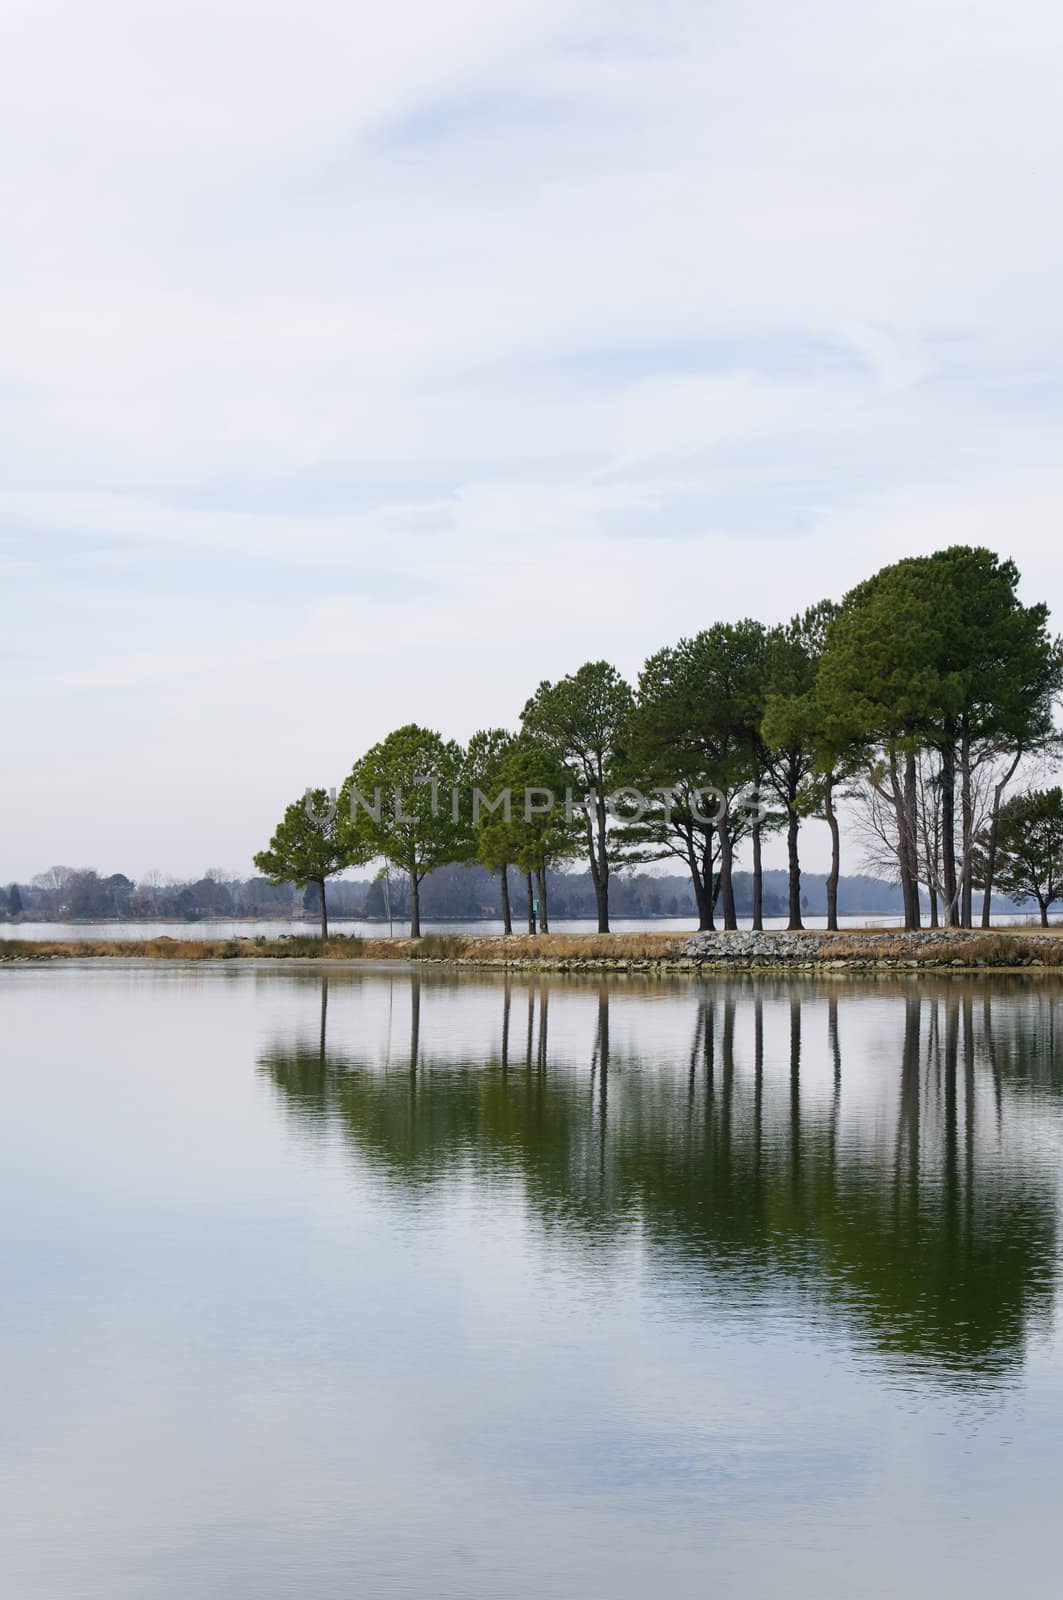 A row of trees reflecting in the water at a bay.